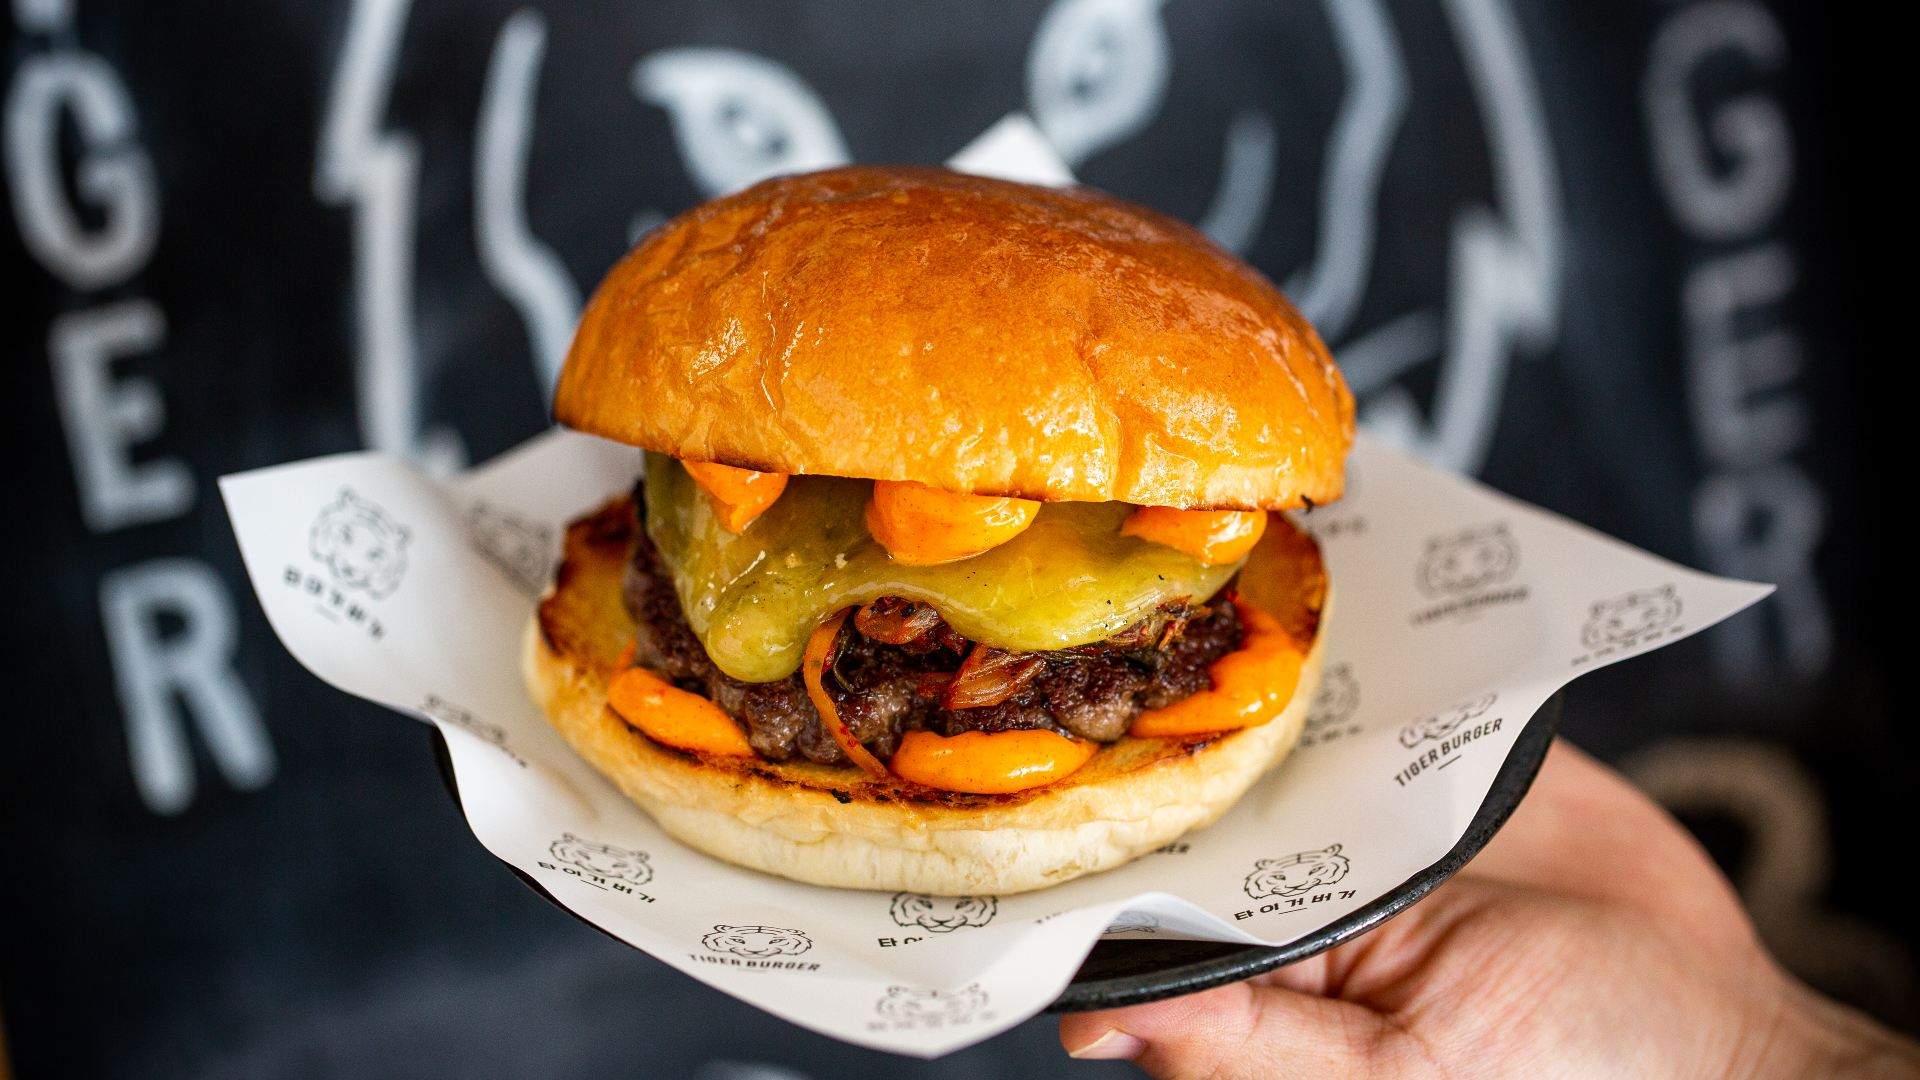 Korean-Fusion Burger Spot Tiger Burger Now Has a Second Site on Dominion Road